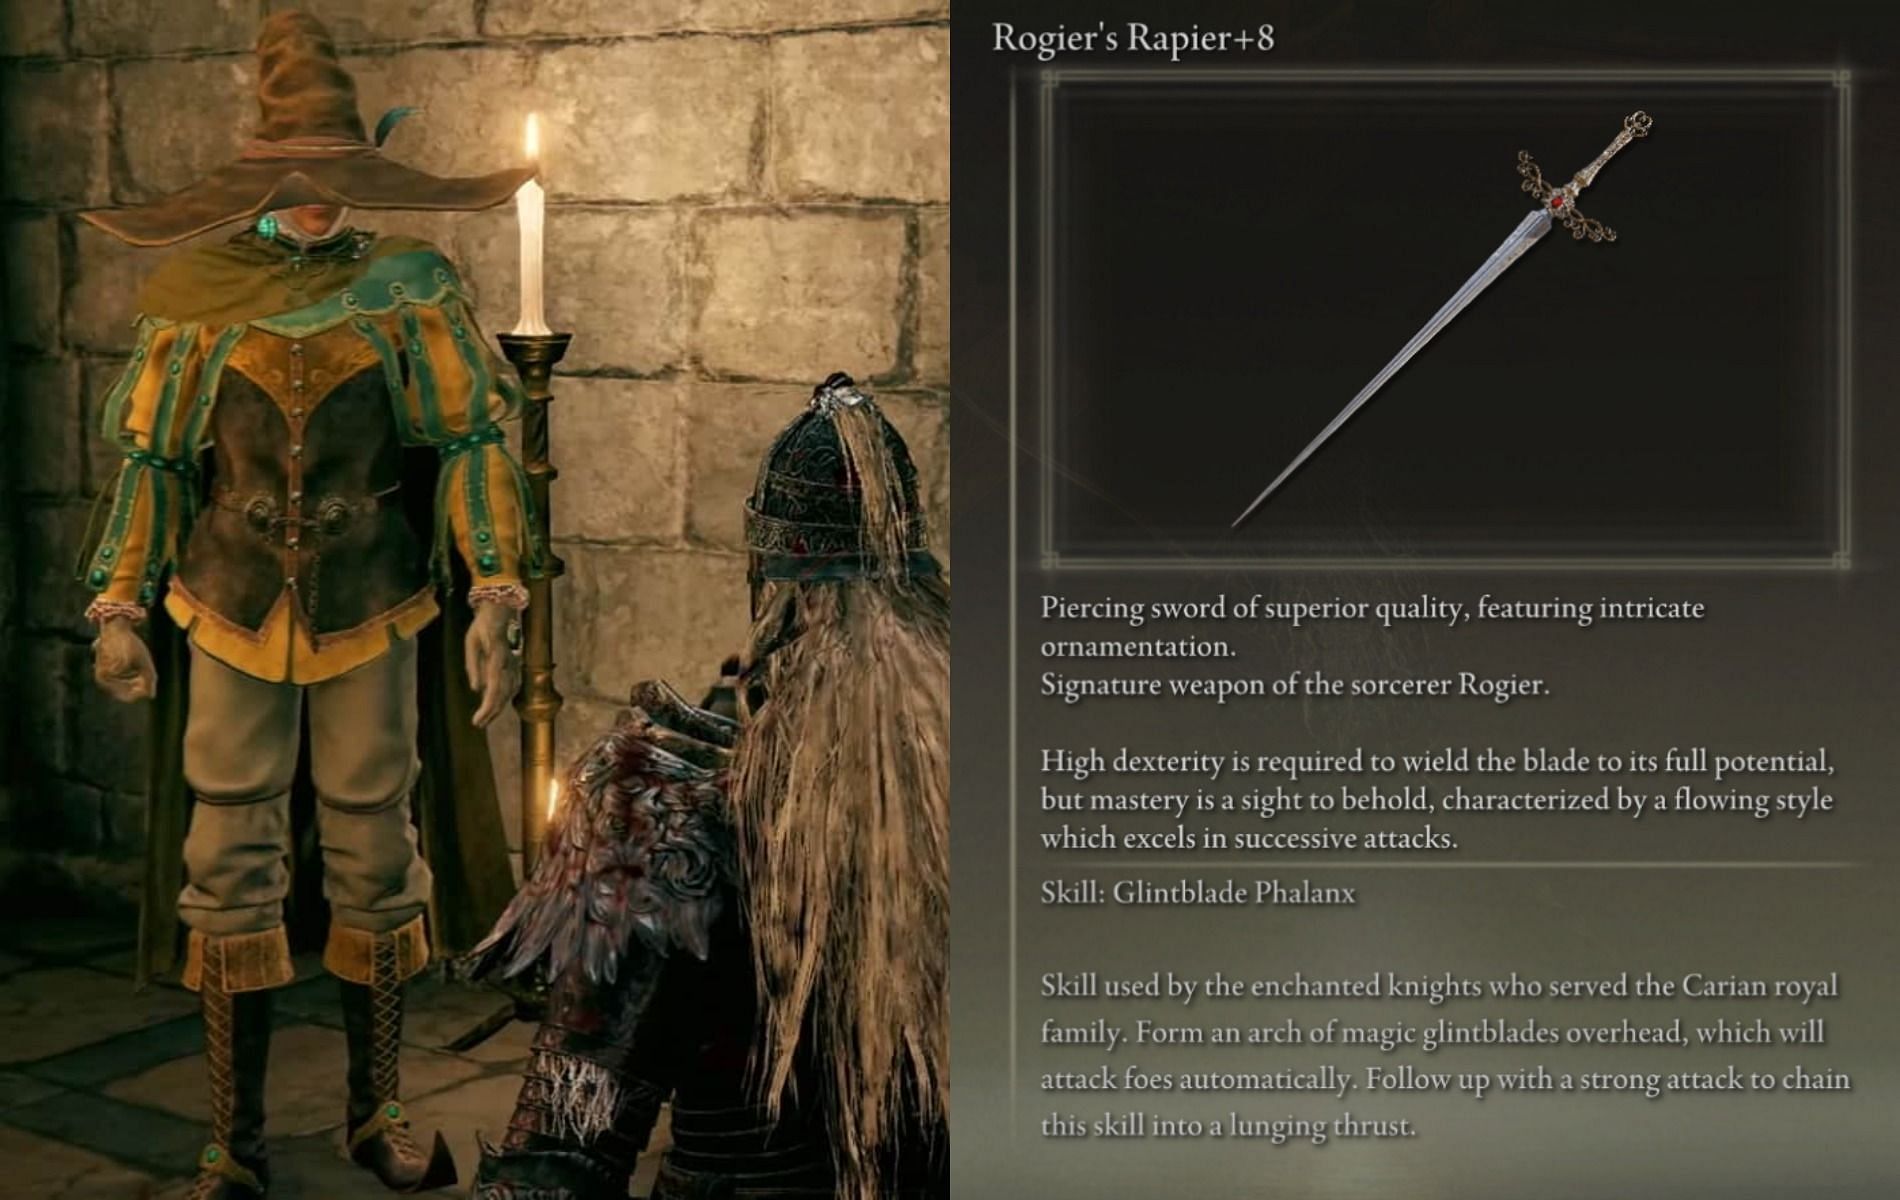 How to obtain Rogier’s Rapier, one of the best early game Dex weapons